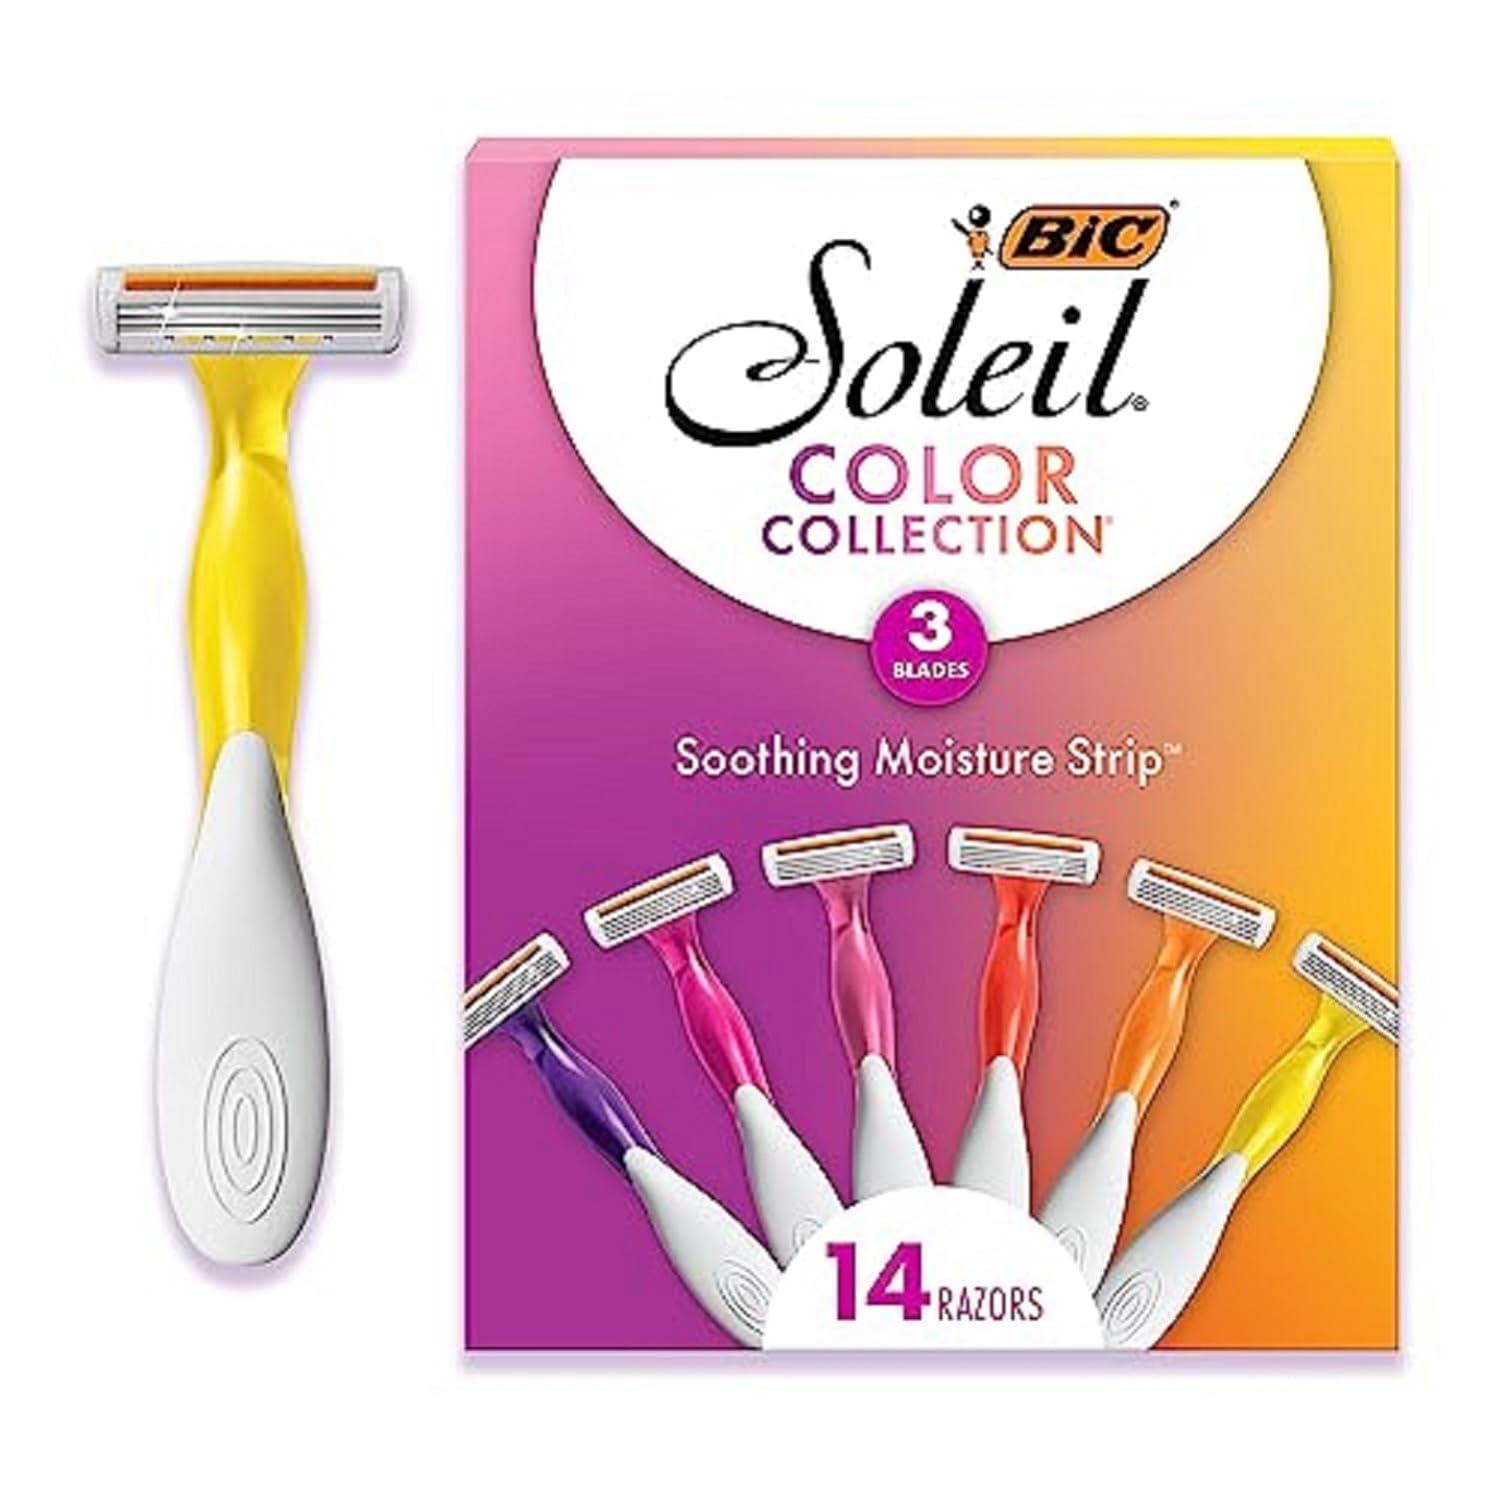 These are such a great deal here! They last more than once, and I love the colors! So easy to use and hold! I am very pleased with these!! This is my second purchase and the first one lasted over a year. I have put these on the subscribe and save system, so I never run out!!